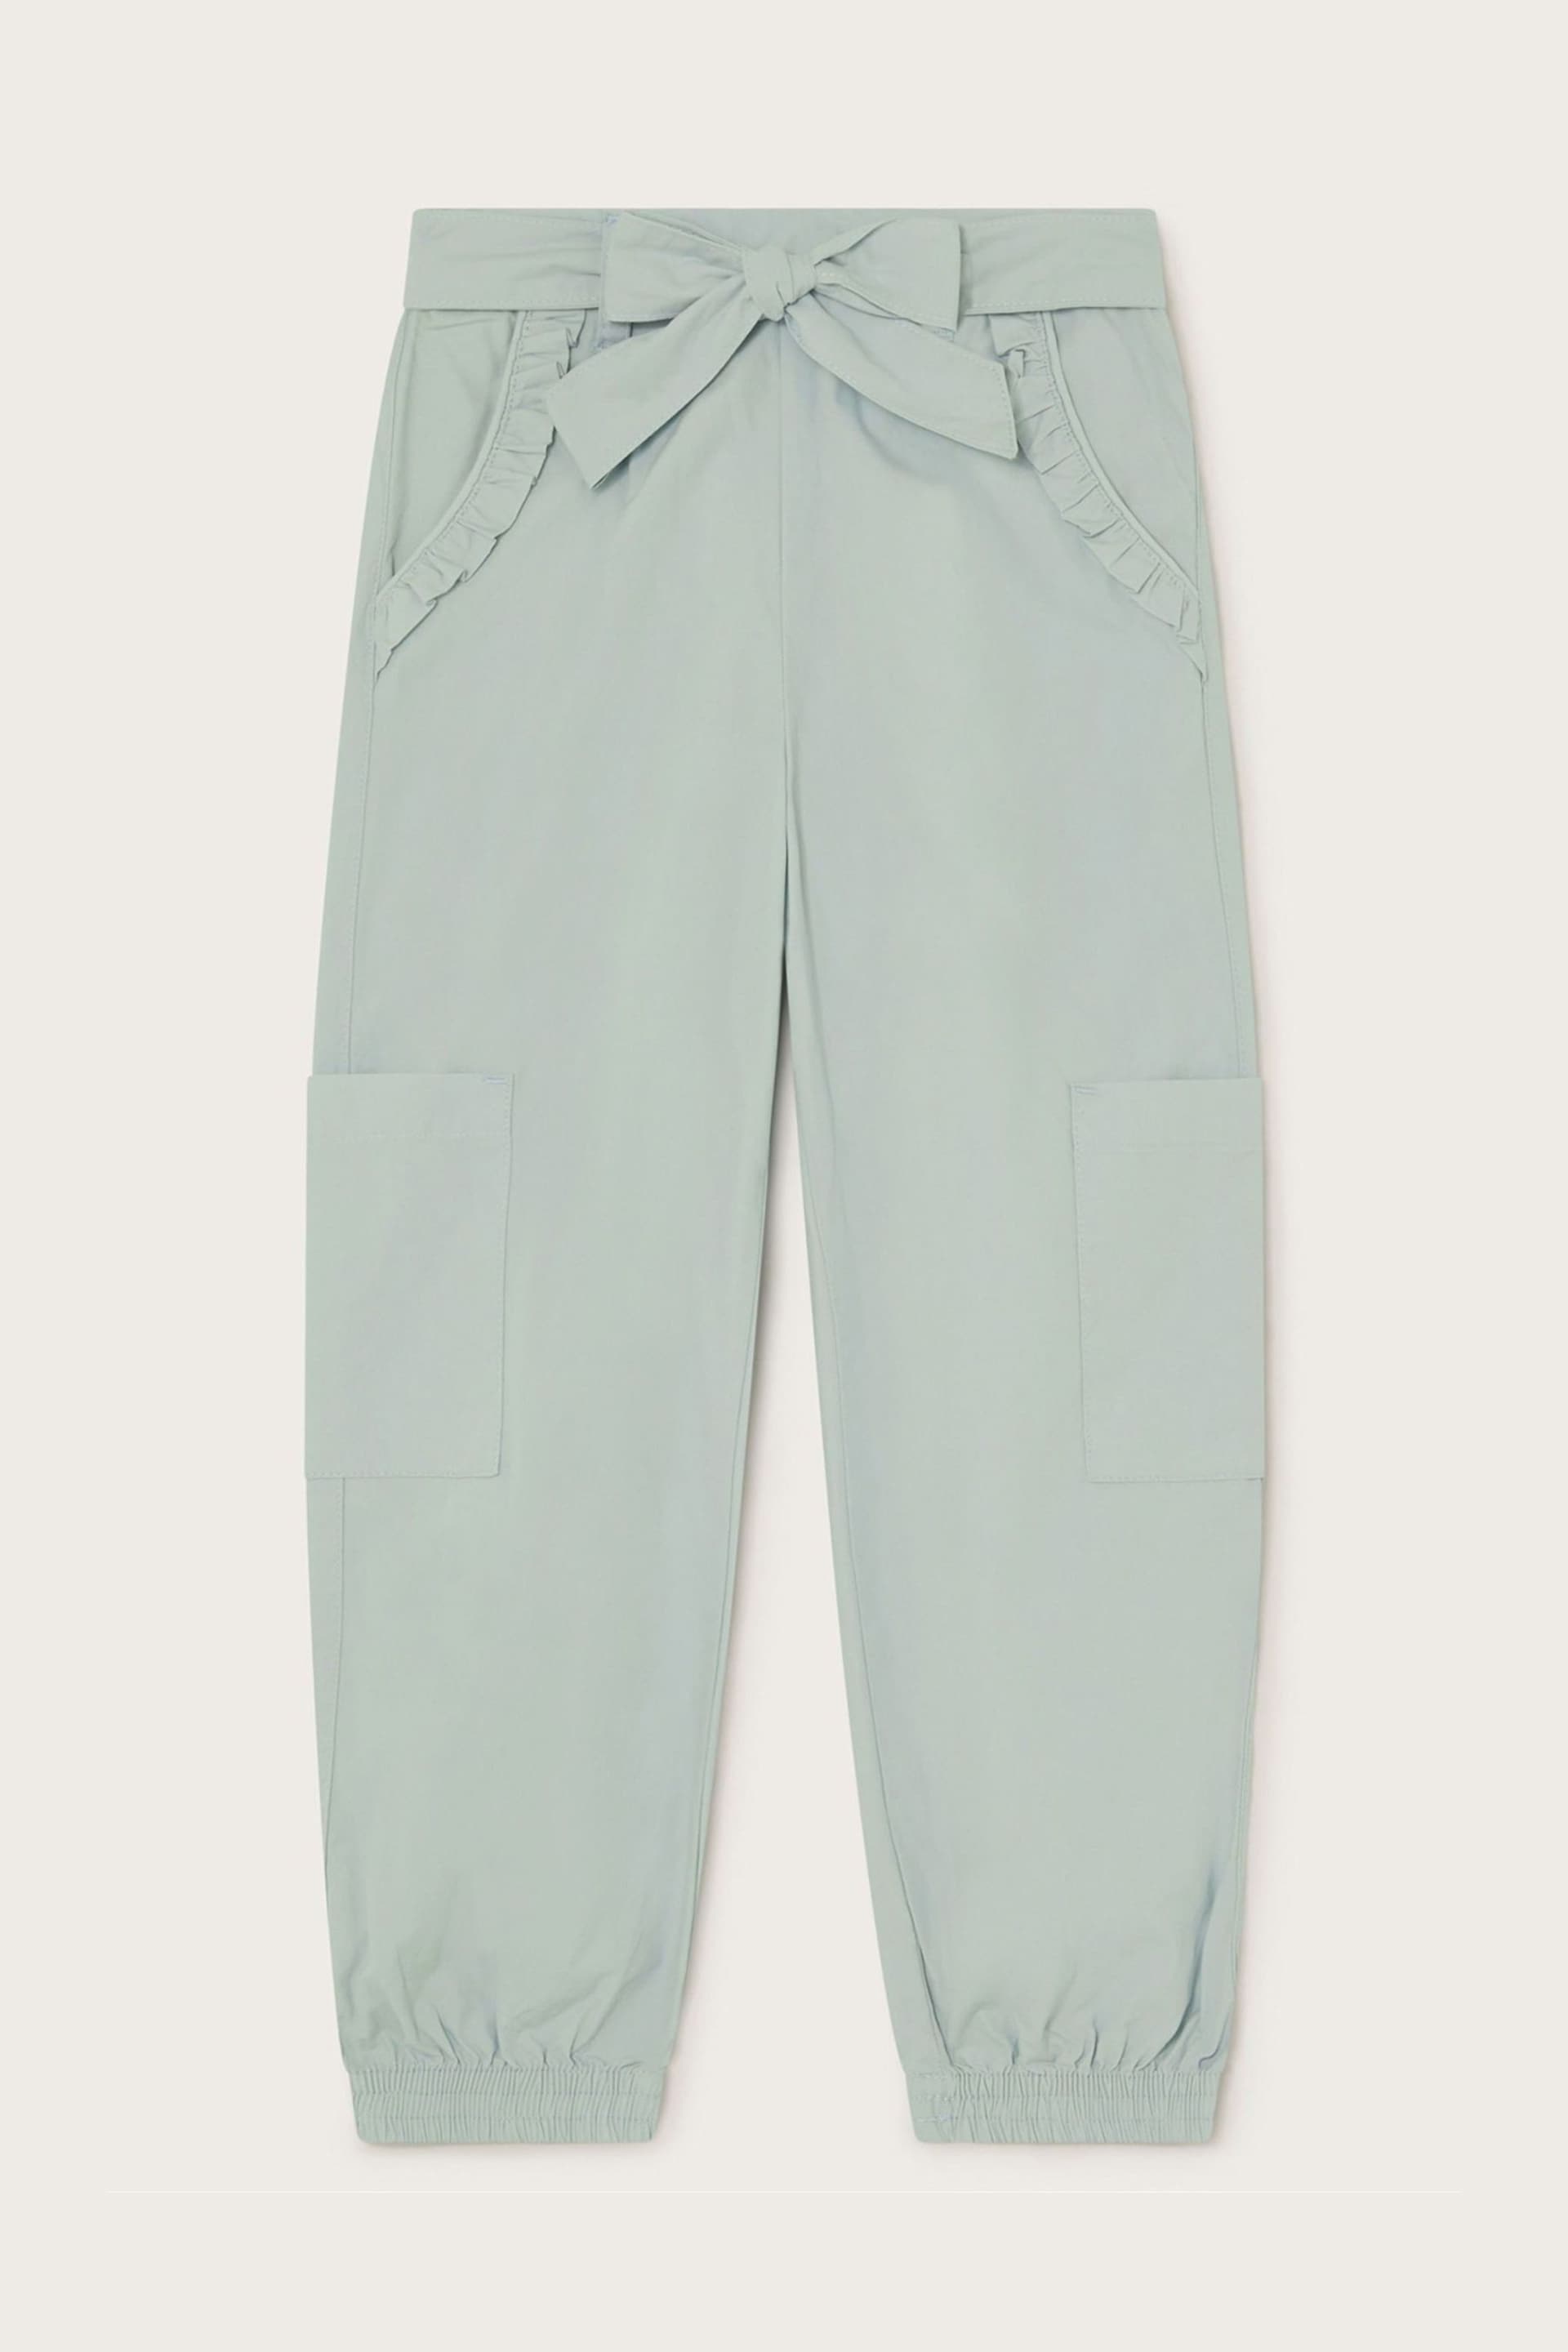 Monsoon Green Frill Pocket Cargo Trousers - Image 1 of 4